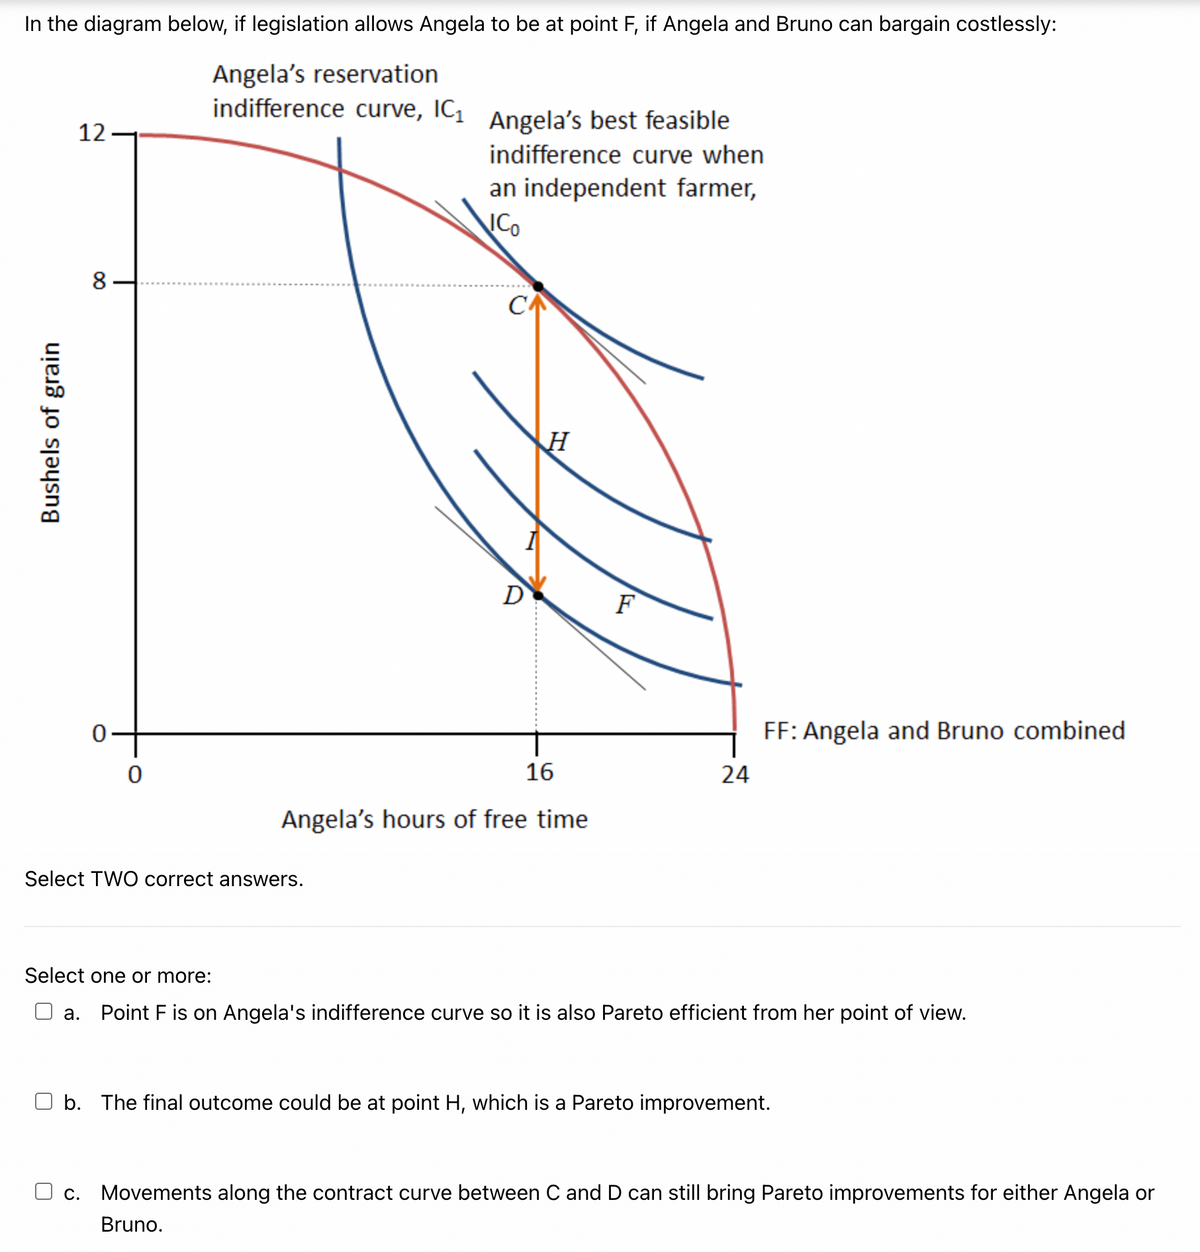 In the diagram below, if legislation allows Angela to be at point F, if Angela and Bruno can bargain costlessly:
Angela's reservation
indifference curve, IC, Angela's best feasible
12
indifference curve when
an independent farmer,
CO
8
CA
D
F
FF: Angela and Bruno combined
16
24
Angela's hours of free time
Select TWO correct answers.
Select one or more:
а.
Point F is on Angela's indifference curve so it is also Pareto efficient from her point of view.
b. The final outcome could be at point H, which is a Pareto improvement.
С.
Movements along the contract curve between C and D can still bring Pareto improvements for either Angela or
Bruno.
Bushels of grain
